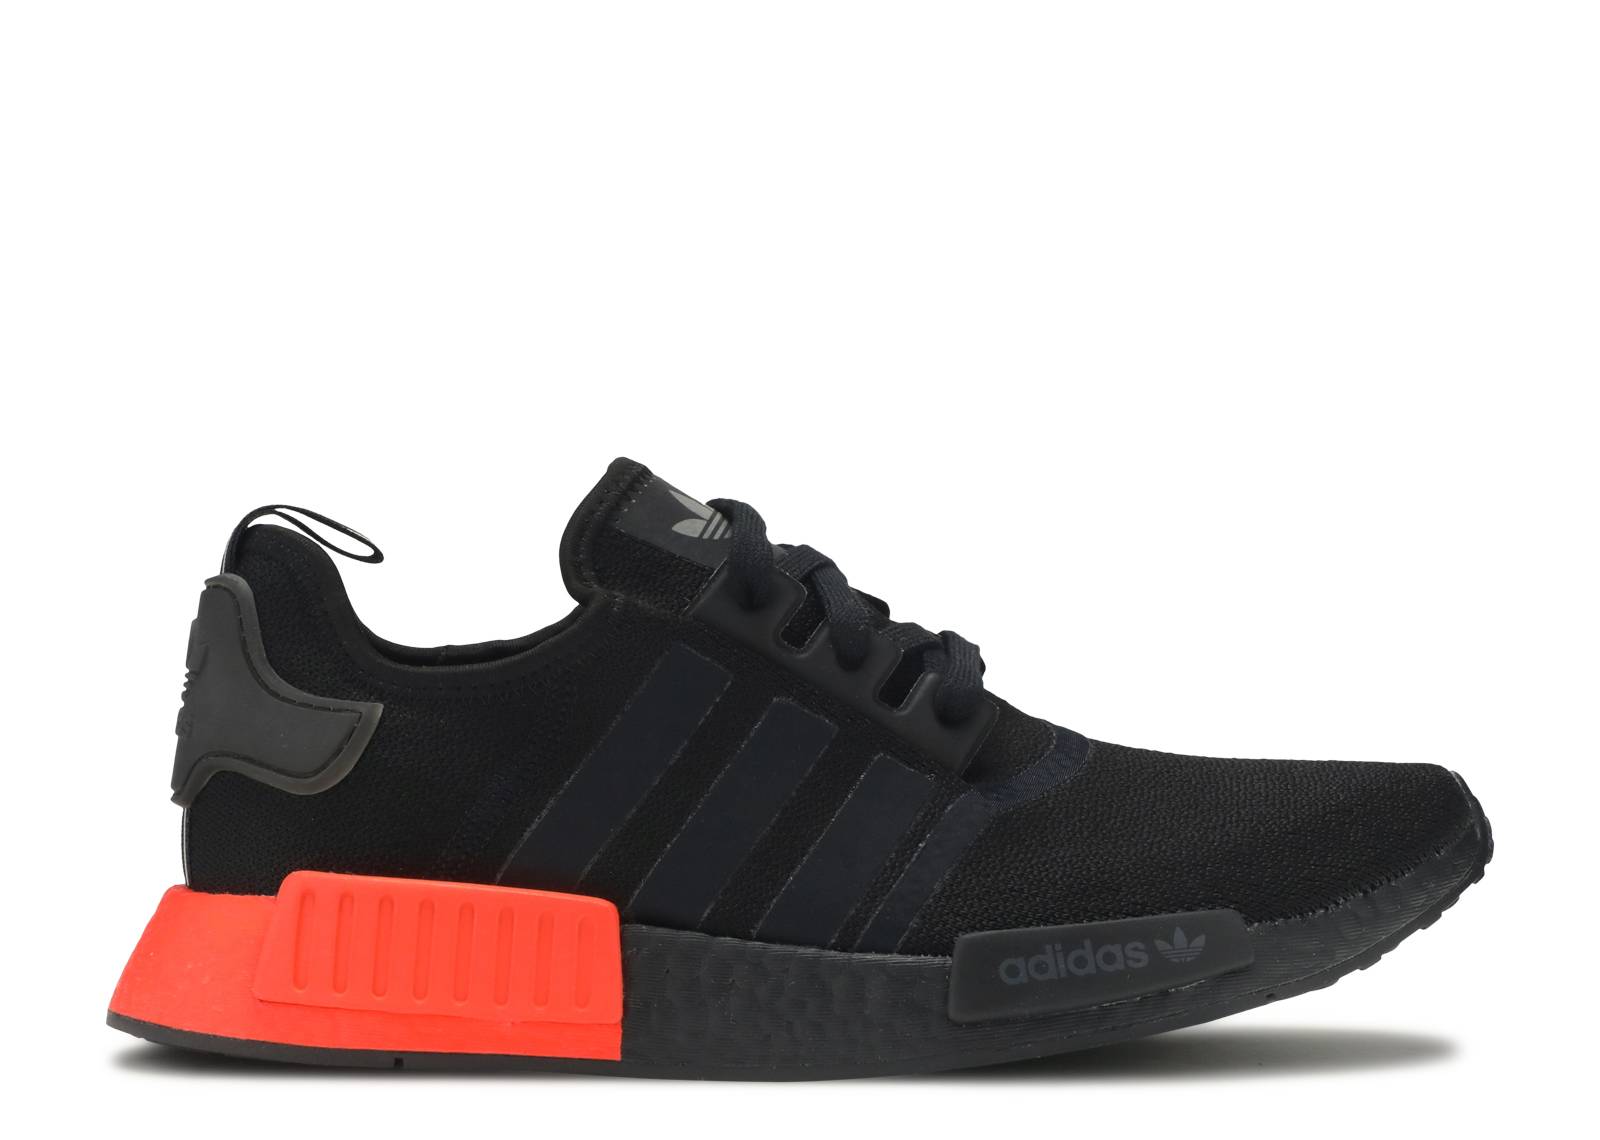 NMD_R1 'Solar Red'